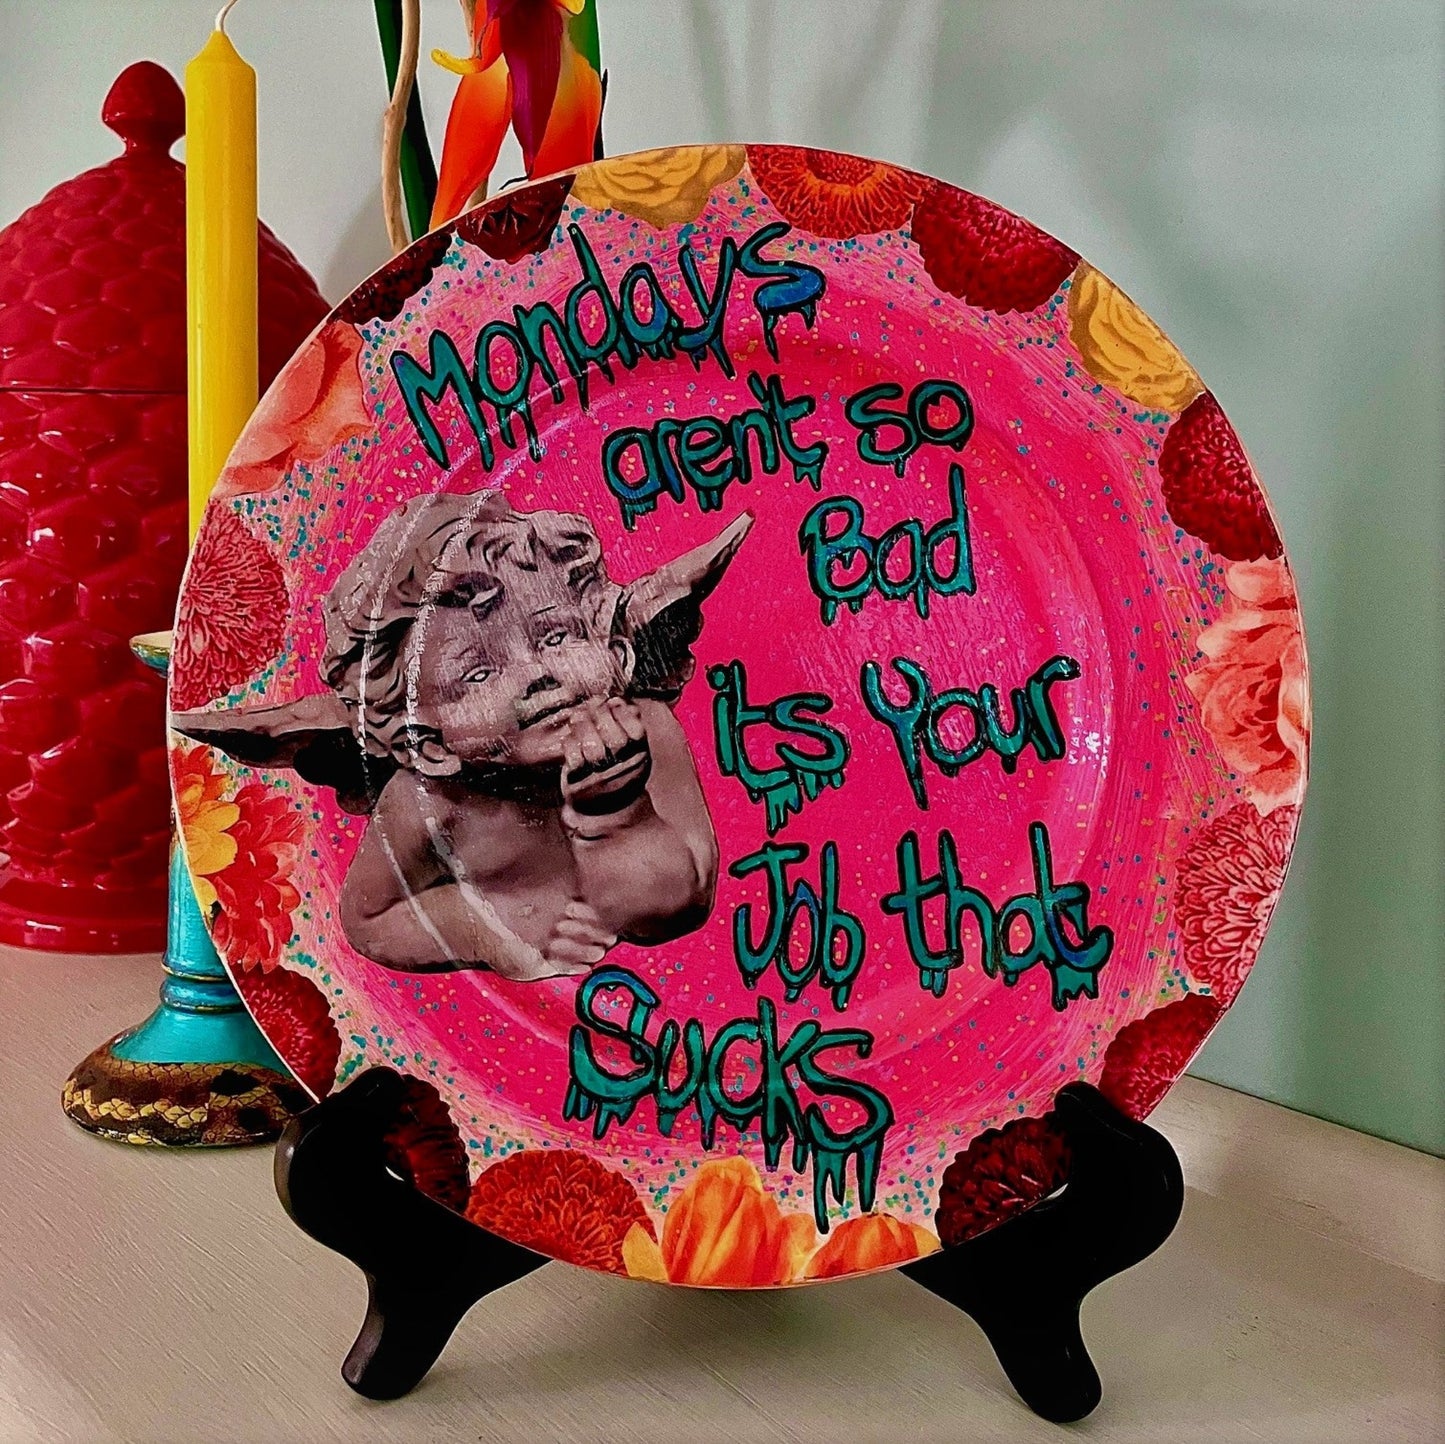 House of Frisson "Mondays Aren't So Bad, It's Your Job That Sucks" Pink Wall Plate front. Collage artwork featuring an angel statue framed with flowers, on pink background. Plate on a plate stand, resting on a side table.